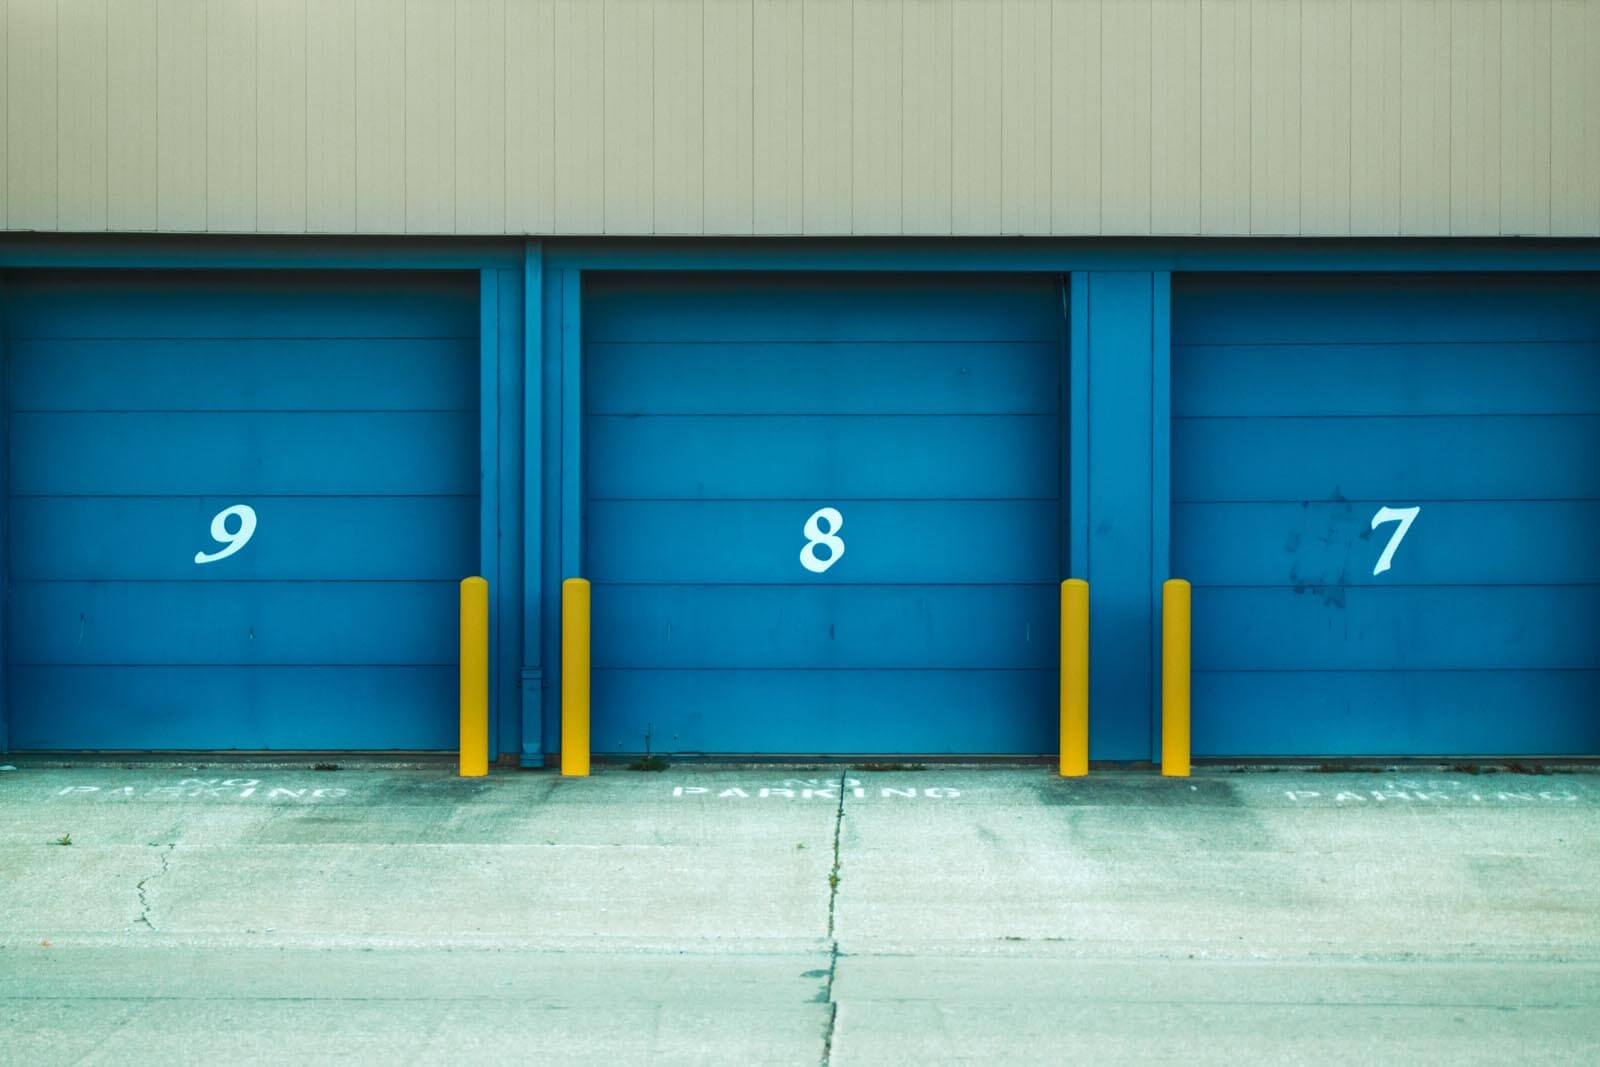 3 blue garage doors numbered 7, 8 and 9